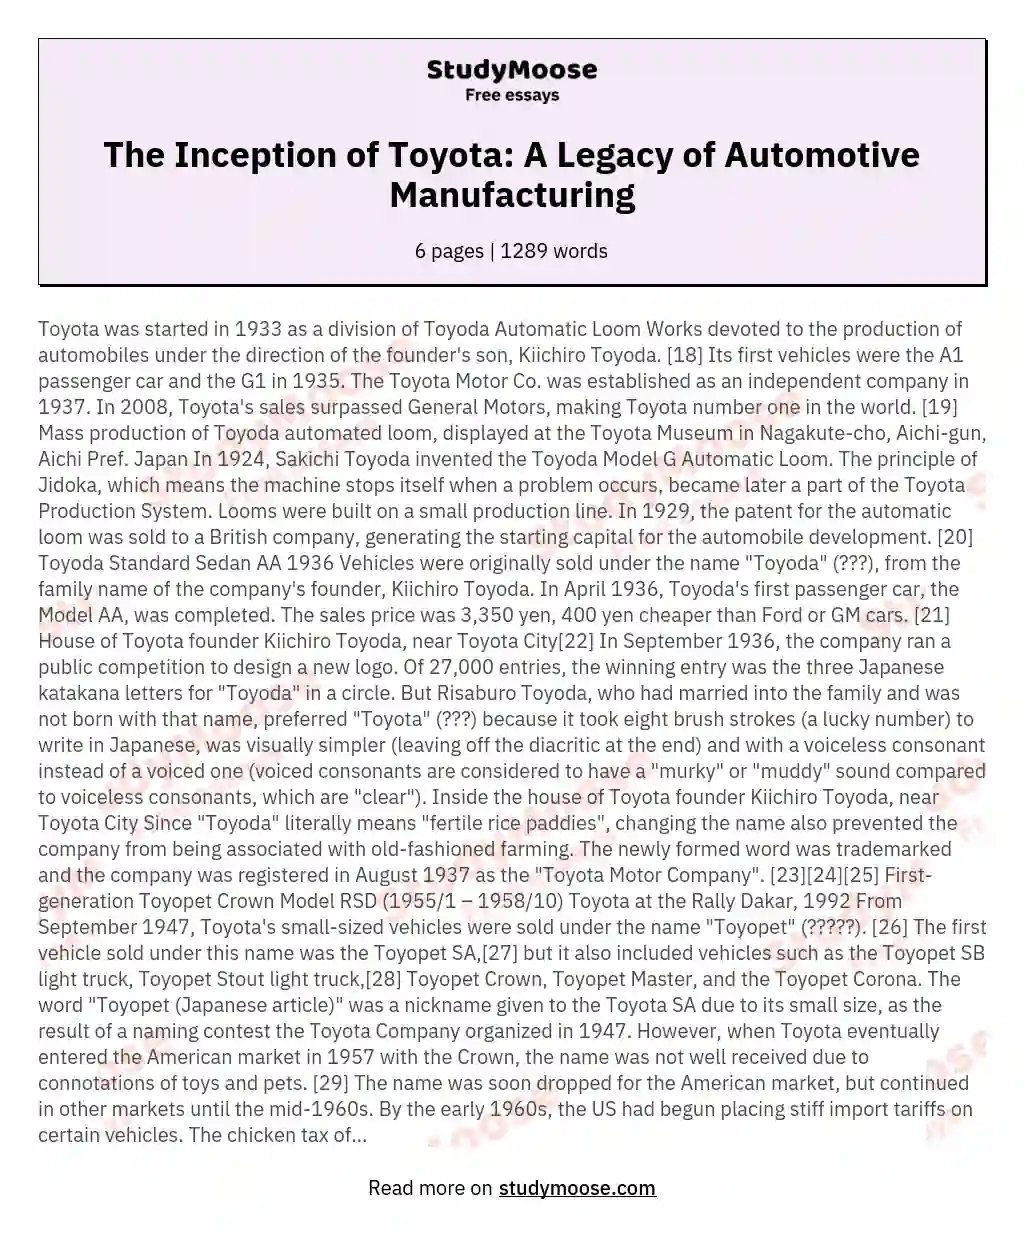 The Inception of Toyota: A Legacy of Automotive Manufacturing essay